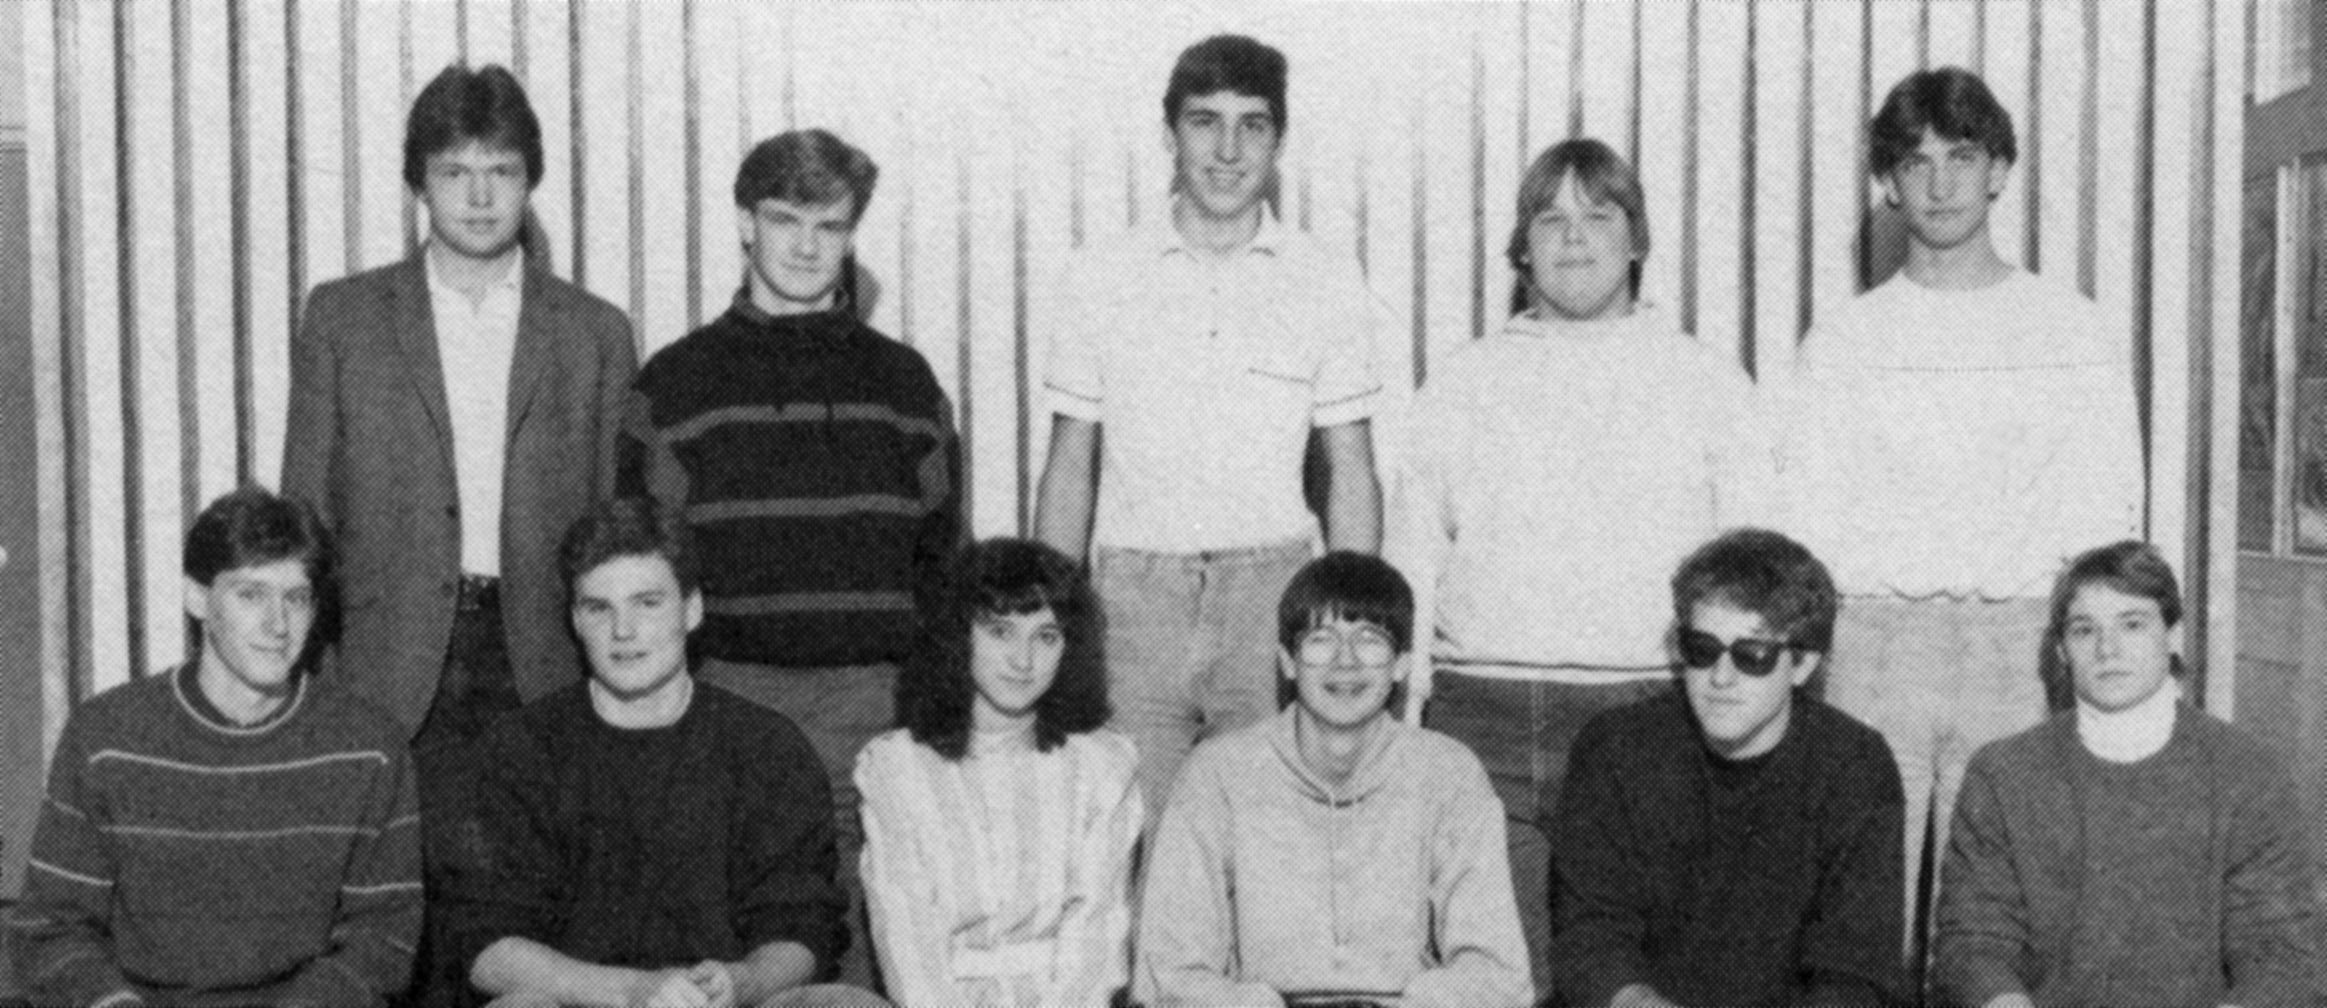 (Click to magnify) FRONT ROW: Rob MacNaughton, Bruce Hall, Michelle Rawnsley, Dave Straughan, Jeff Vance, Steve Hackner; ***BACK ROW: Dave Gribble, Dale Winder, Paul Salvini, Bryon Watts, Ed Johnson.